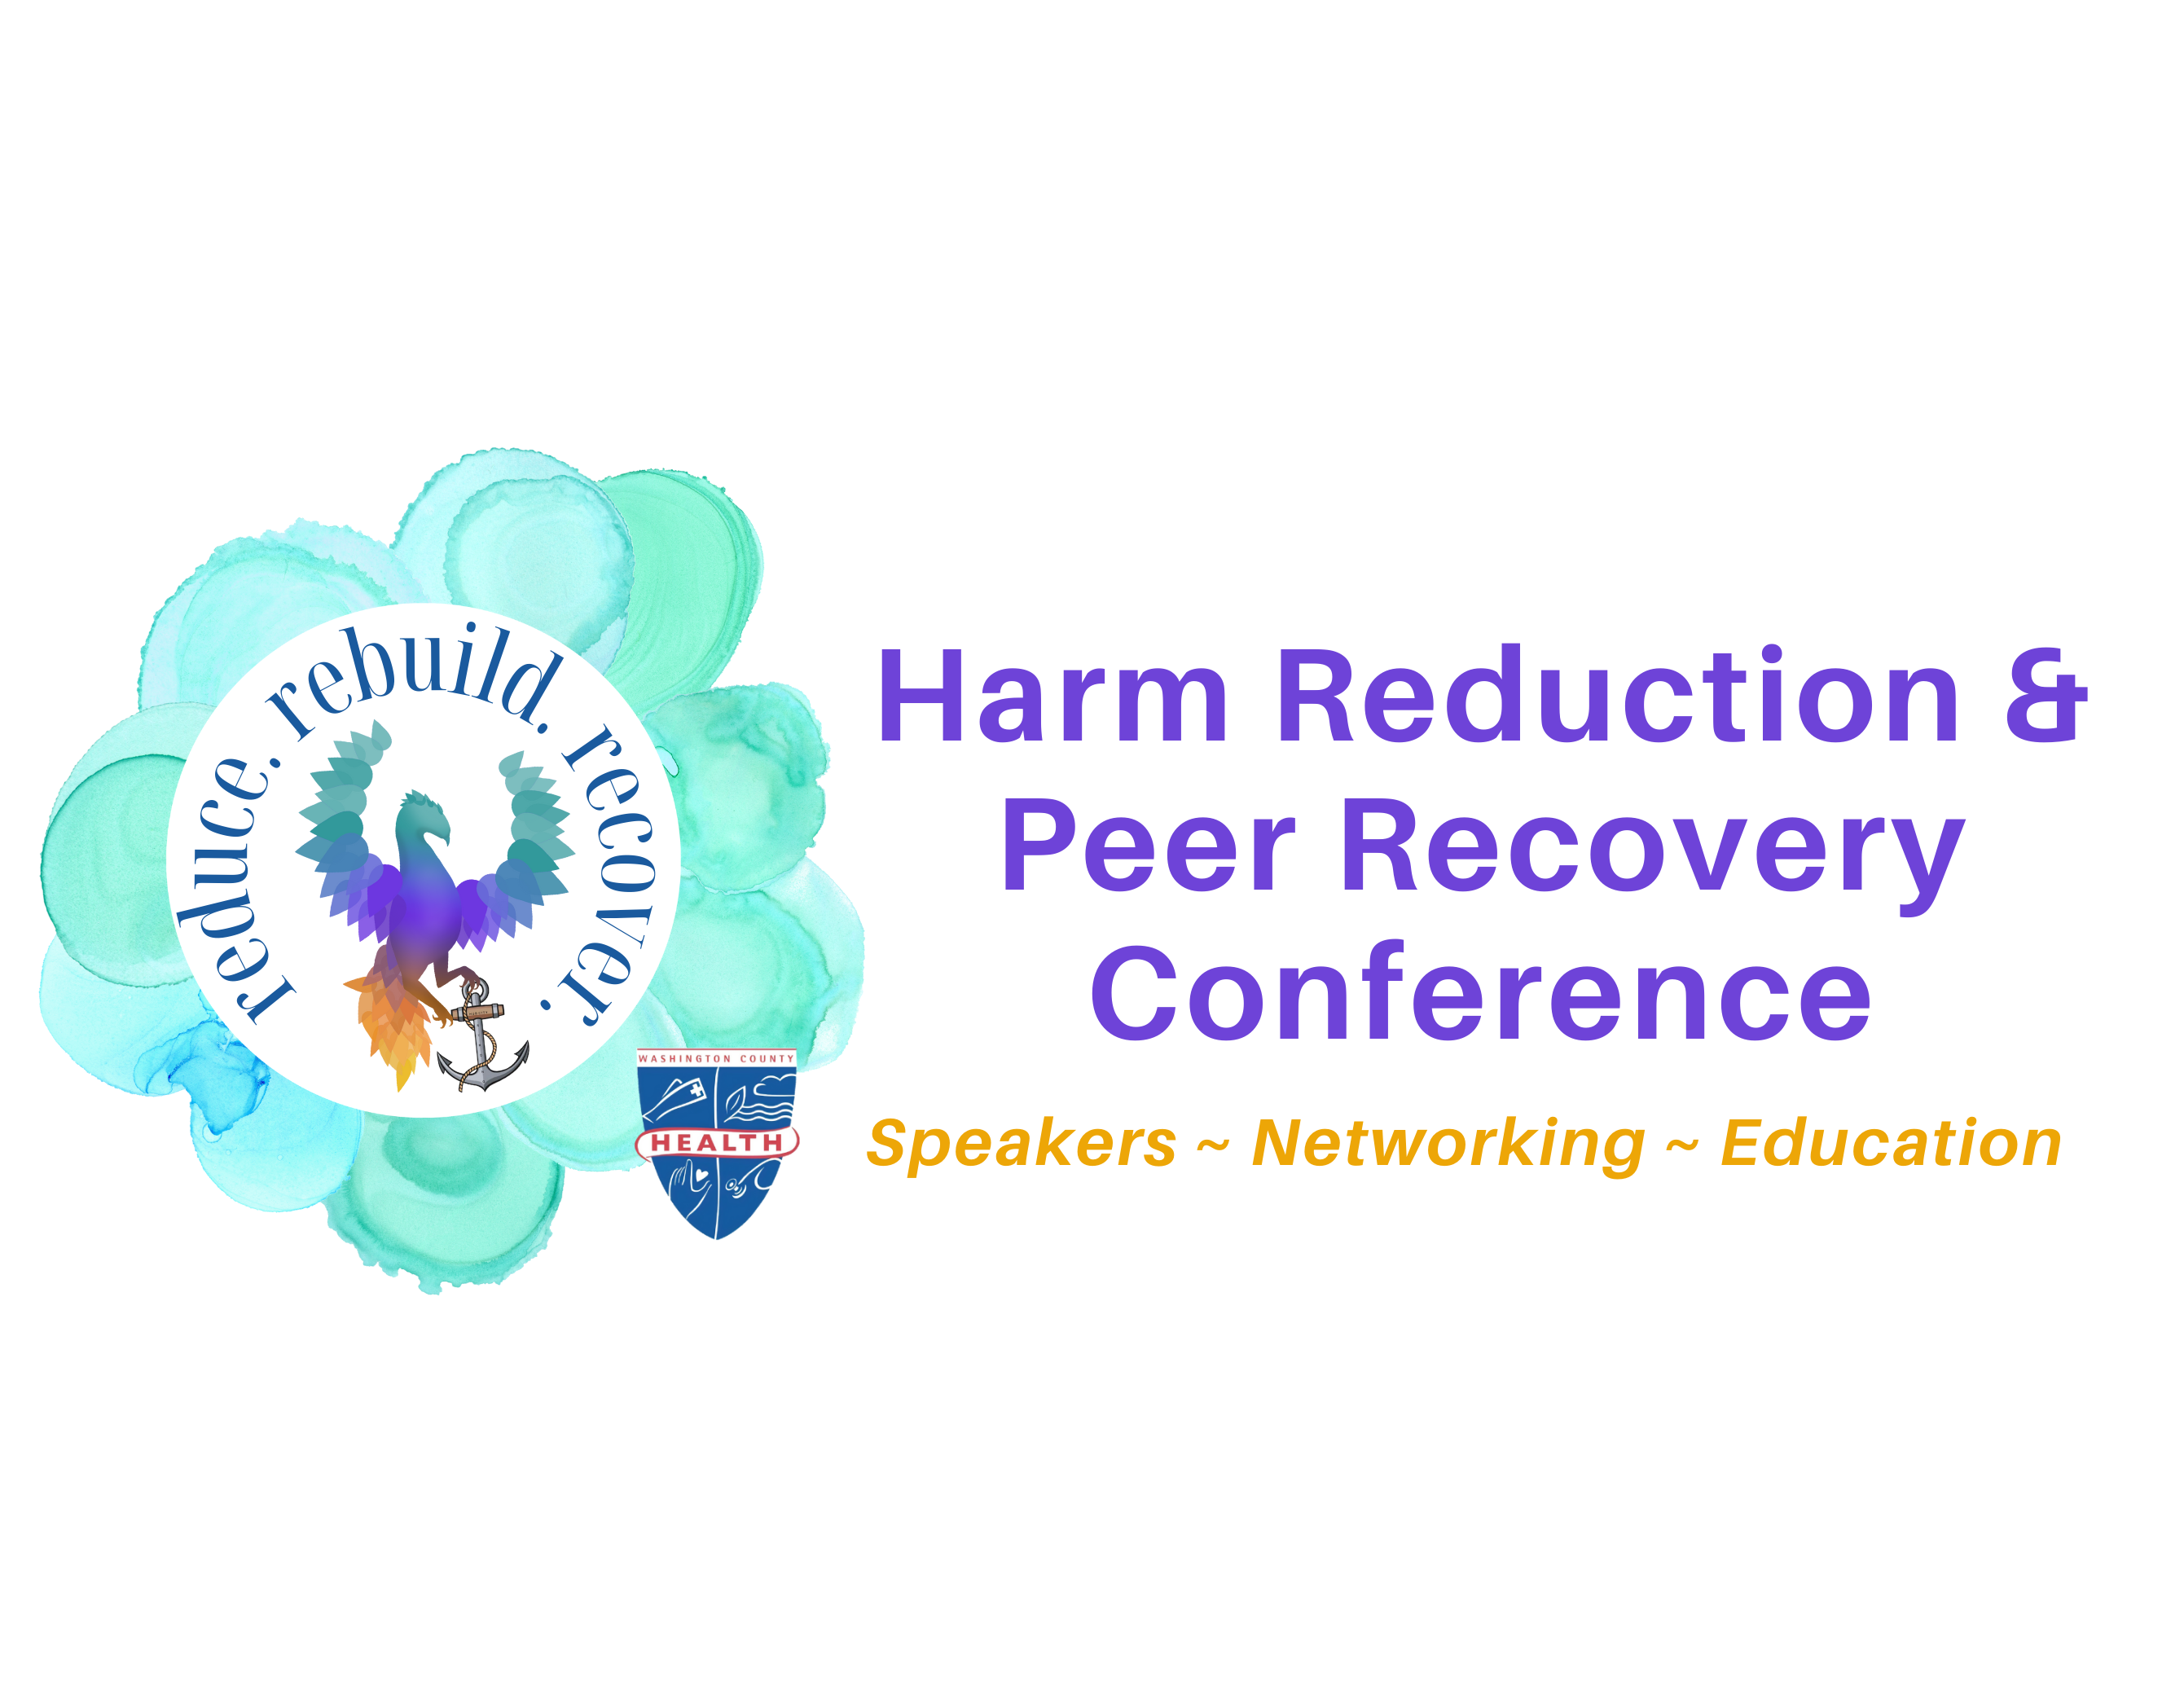 harm reduction & peer recovery conference